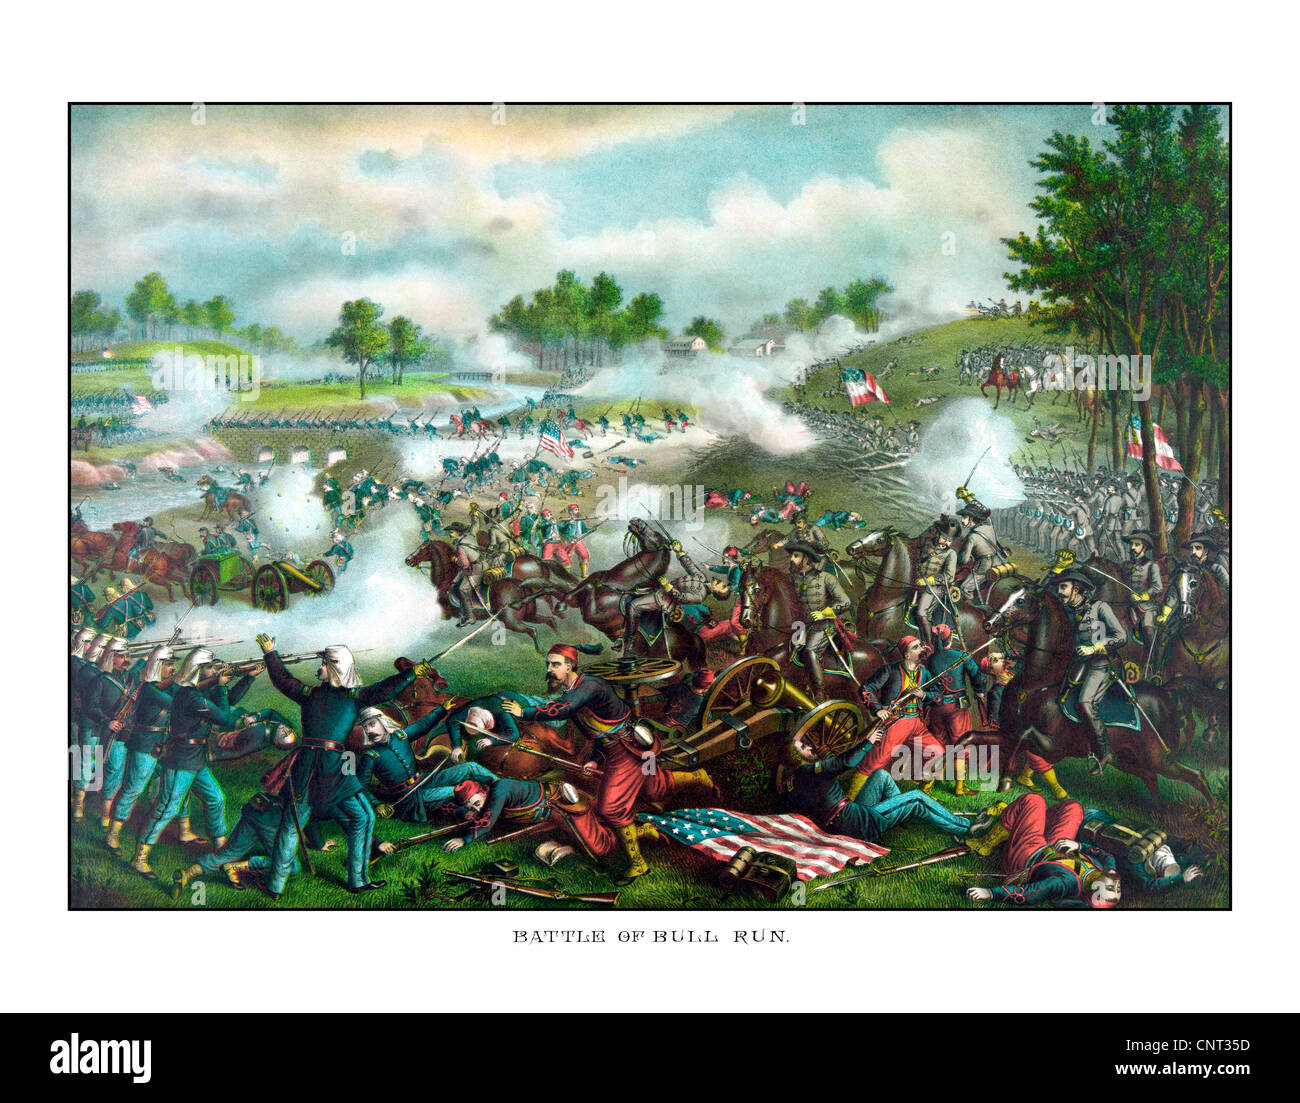 Vintage Civil War painting of Union and Confederate troops fighting at The Battle of Bull Run. Stock Photo